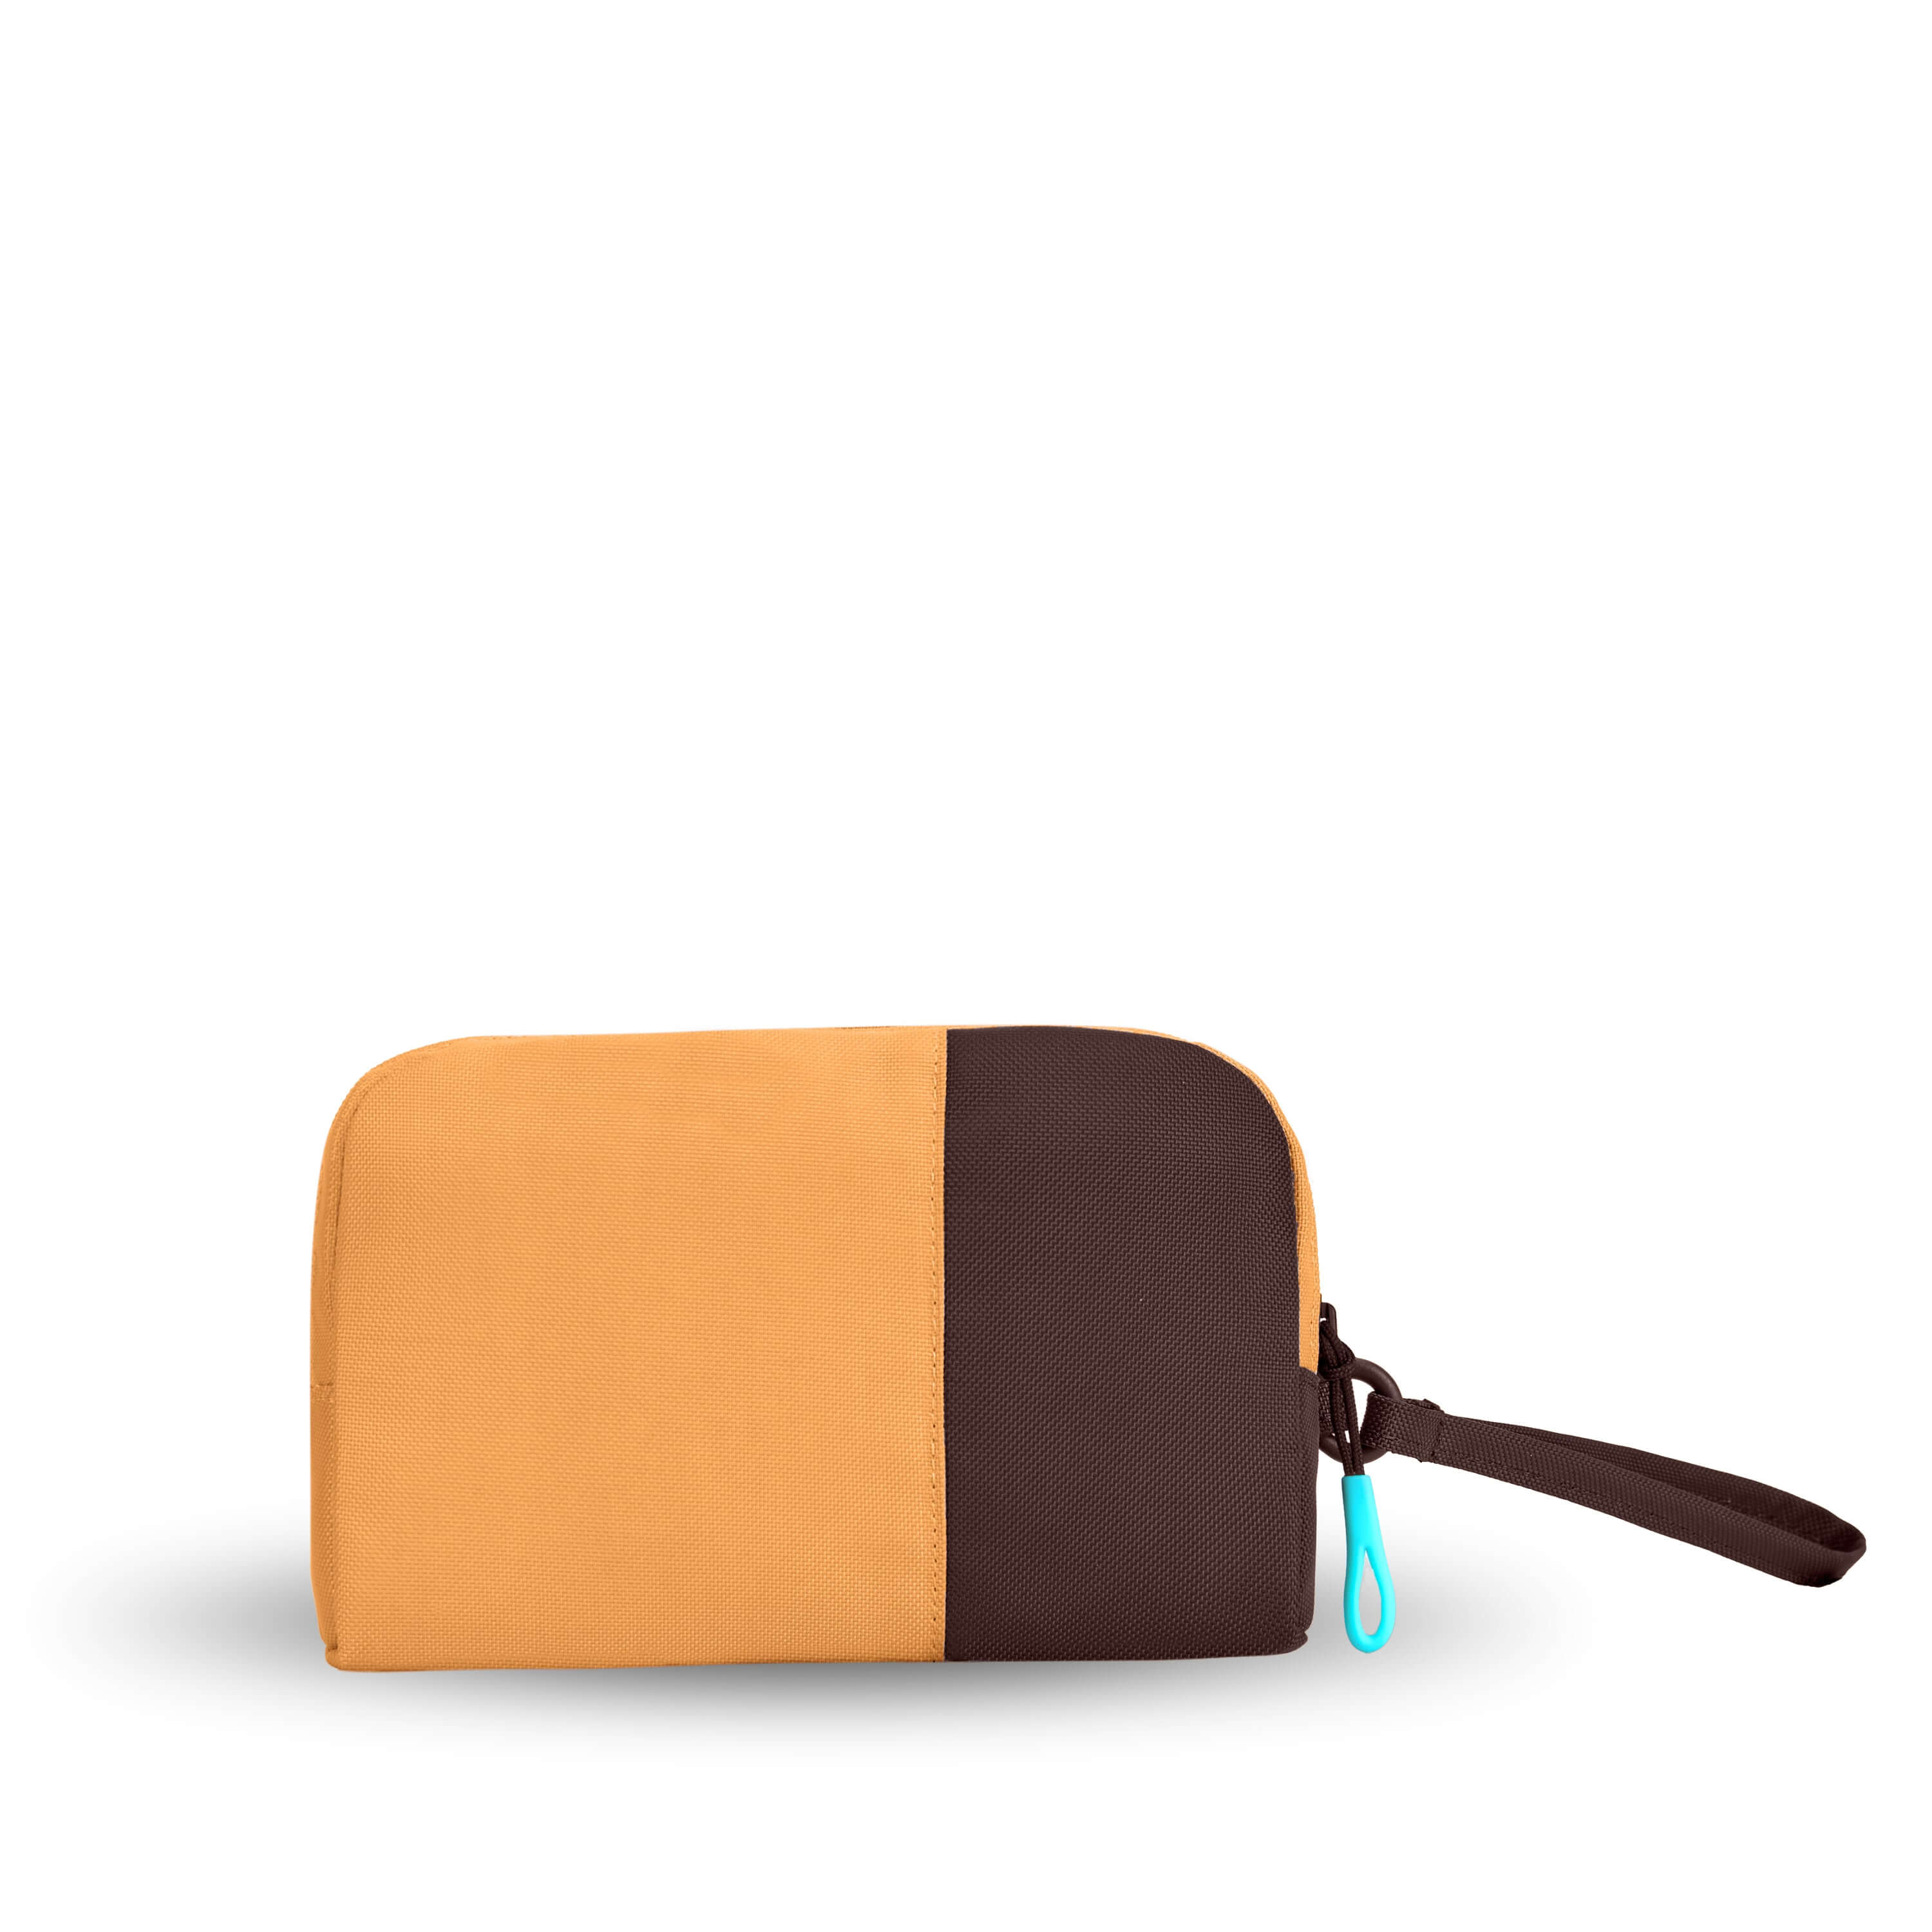 Back view of Sherpani travel accessory, the Jolie in Sundial, in medium size. The pouch is two-toned in burnt yellow and brown. It features a brown wristlet strap and an easy-pull zipper accented in aqua. 